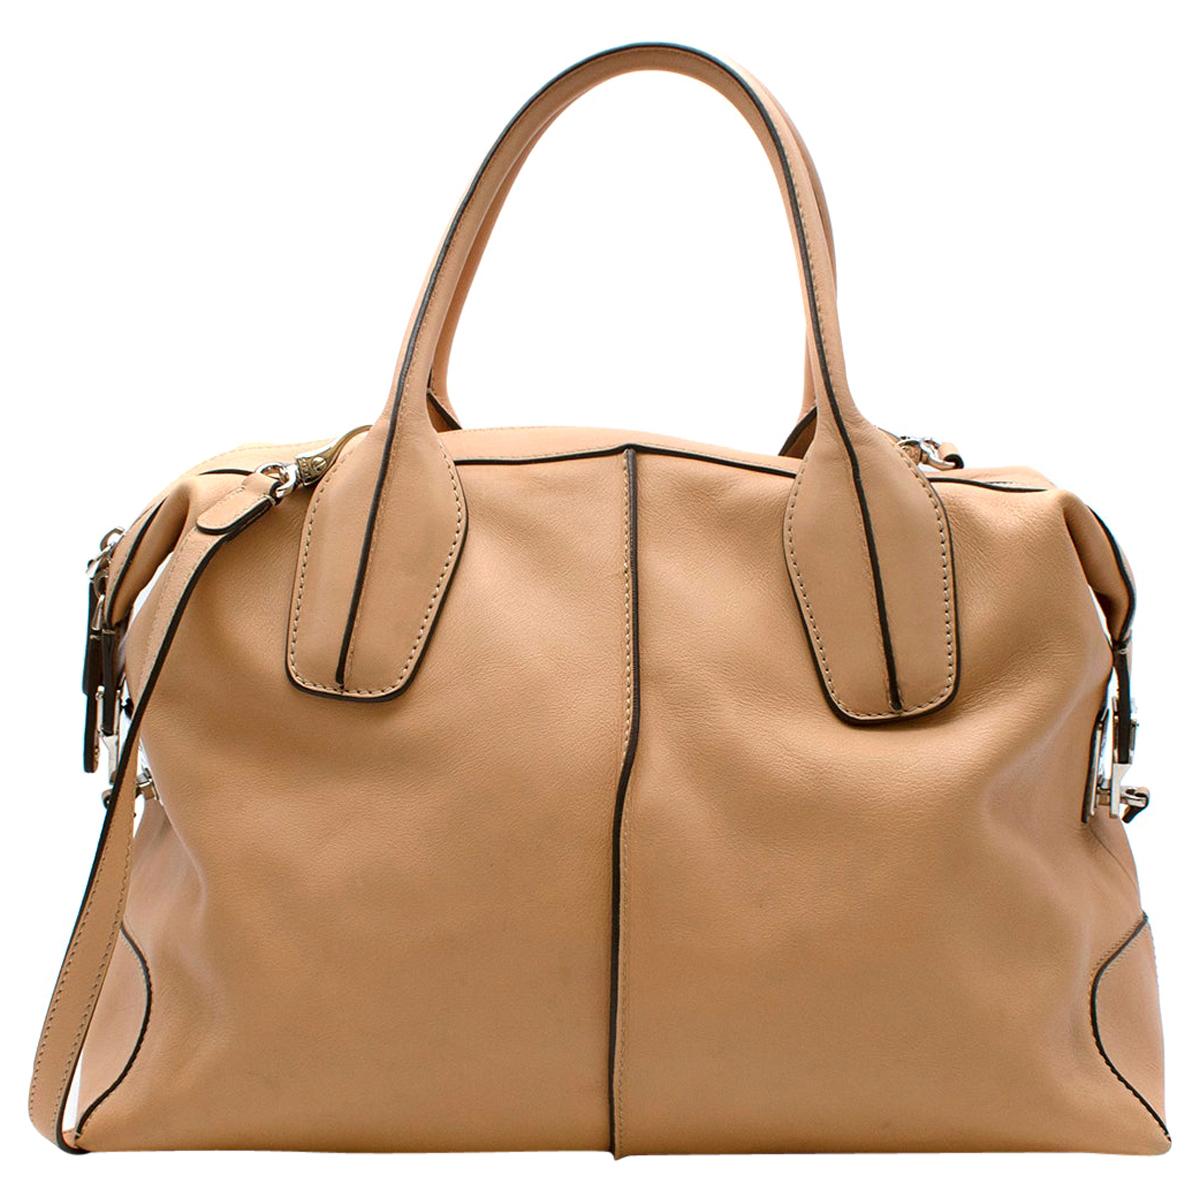 Tods Tan Leather D-Styling Tote Bag   For Sale